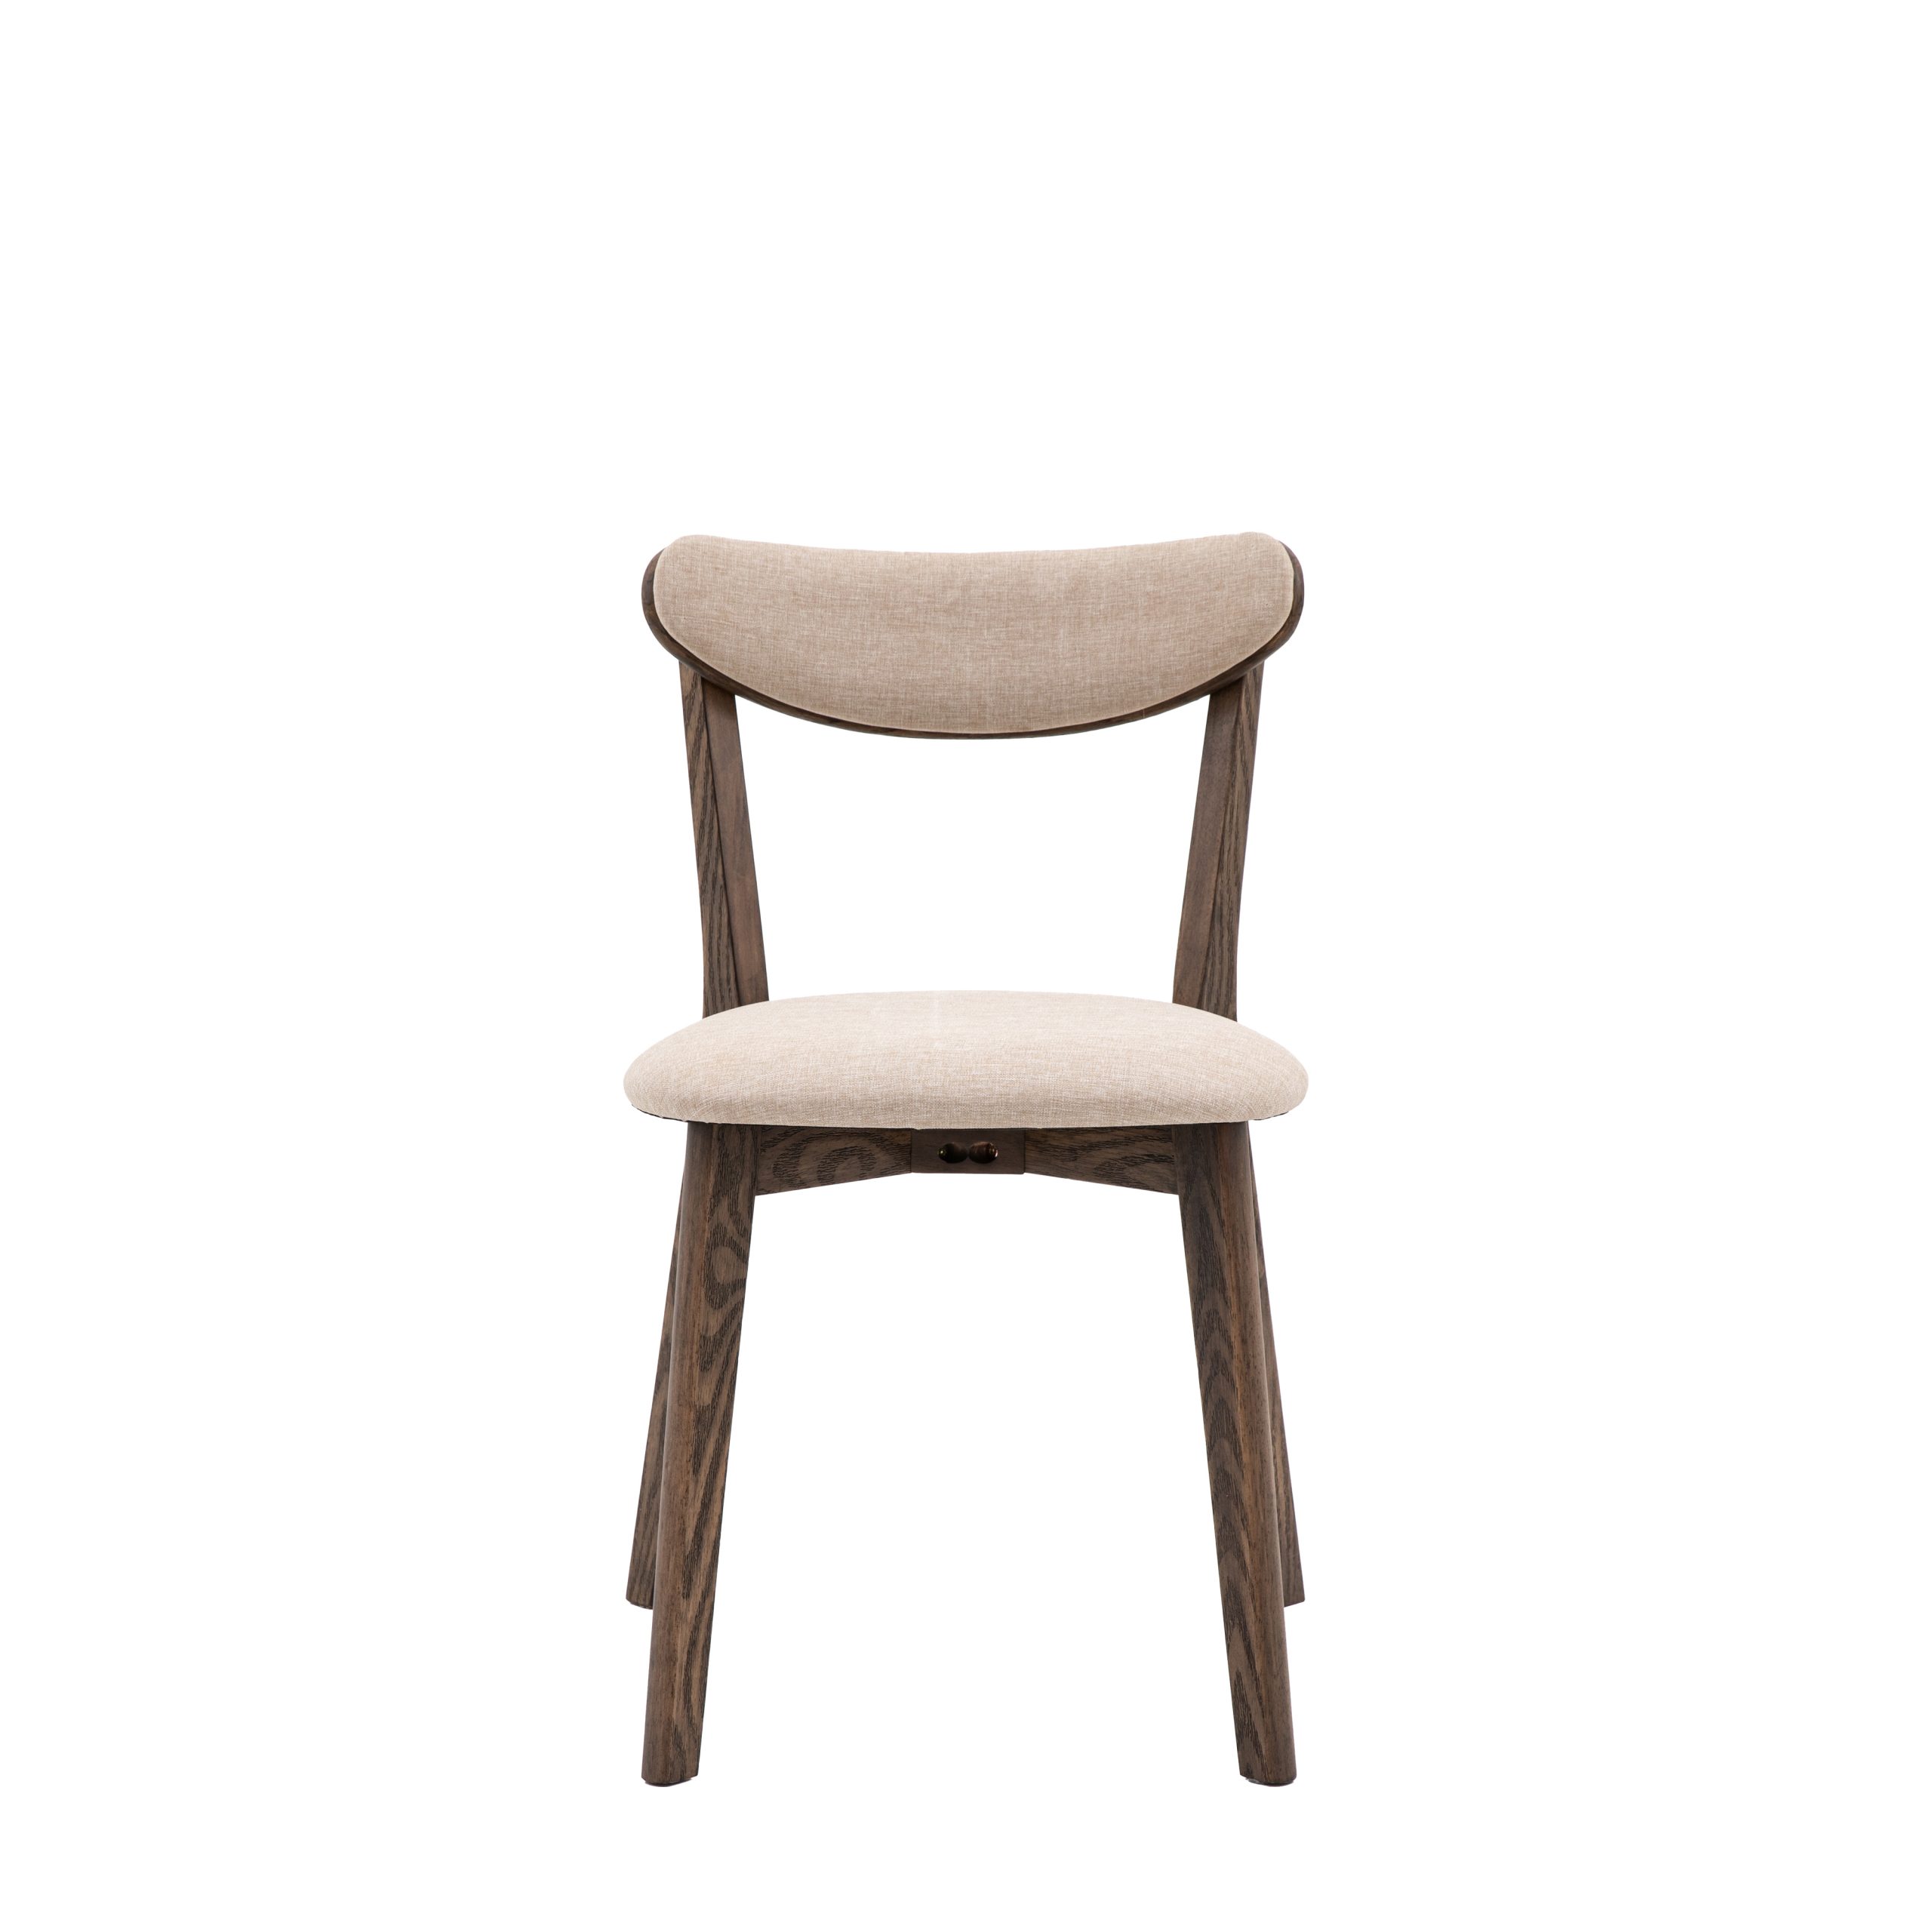 Gallery Direct Hatfield Dining Chair Smoked (Set of 2)